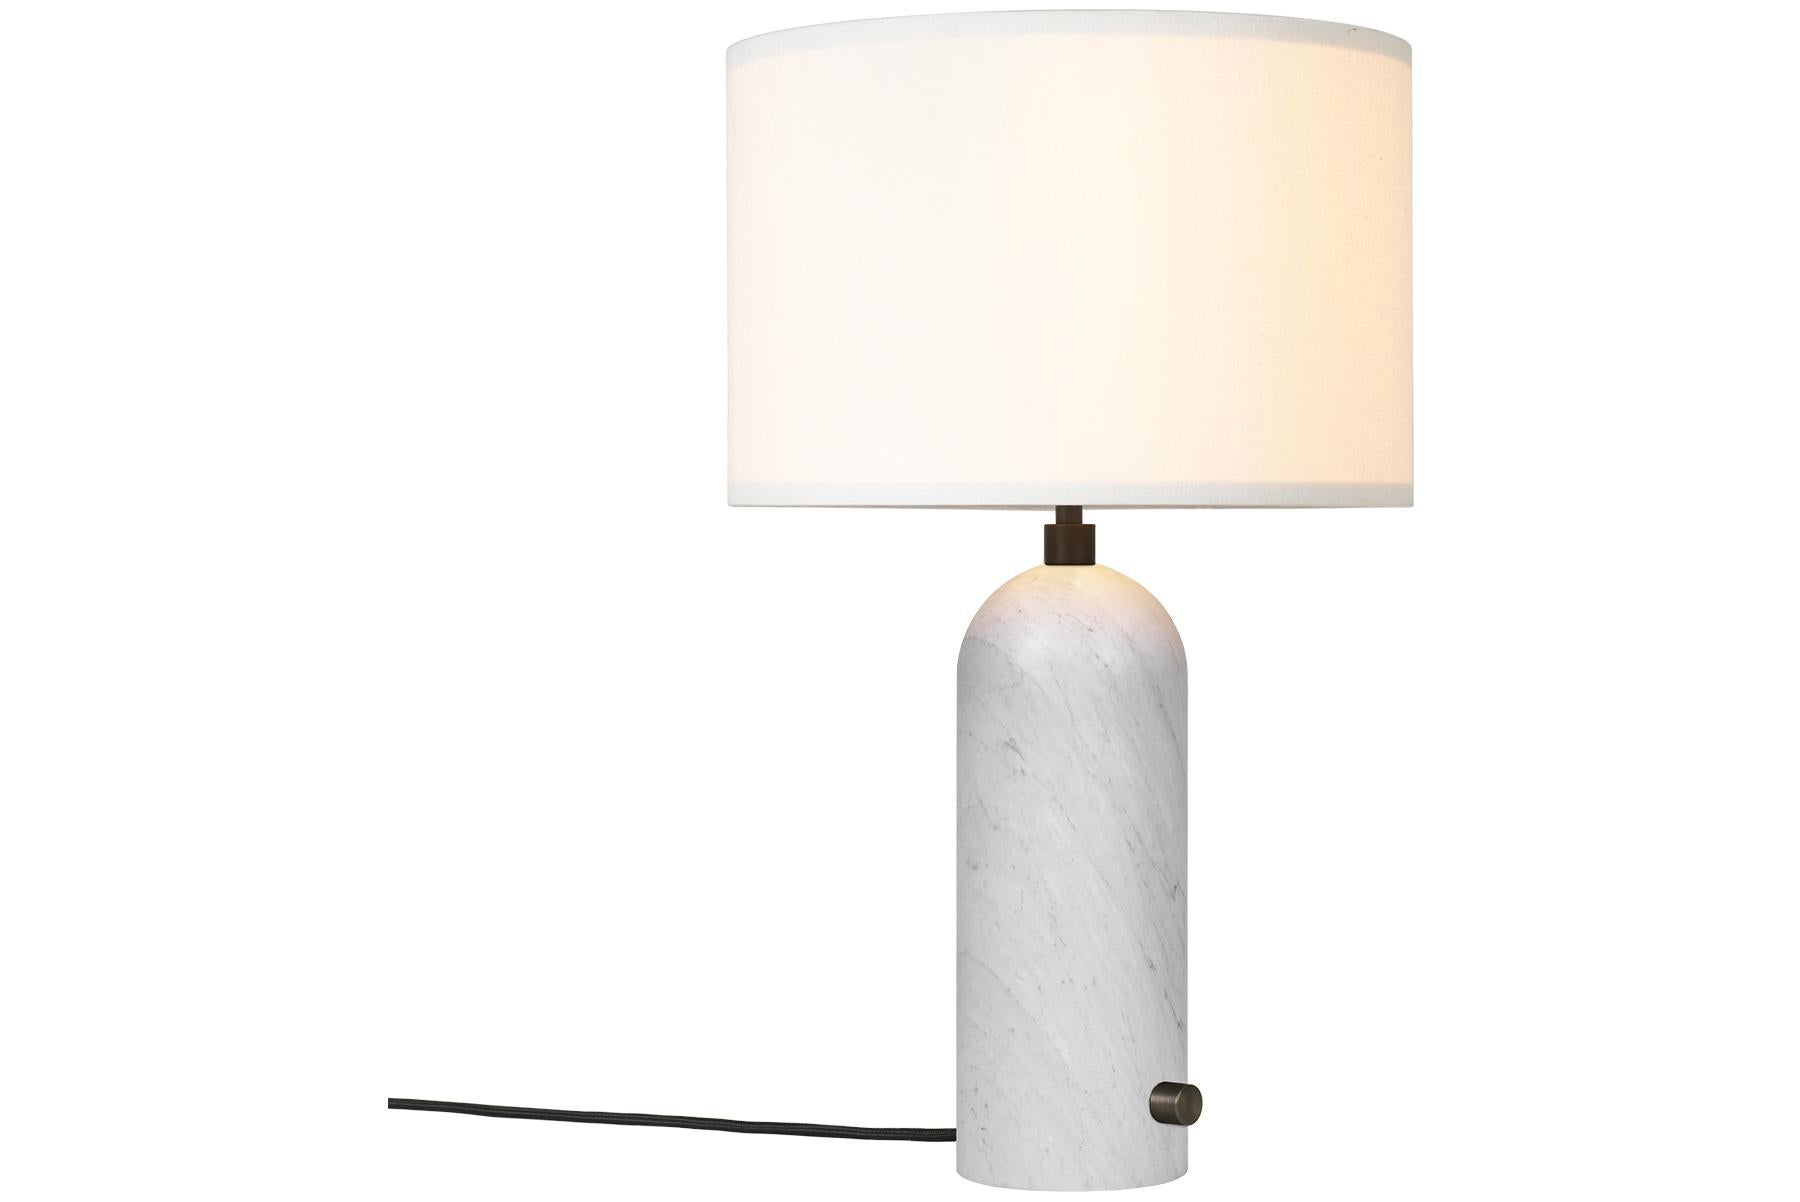 Post-Modern Gravity Table Lamp - Small, Grey Marble, White. For Sale